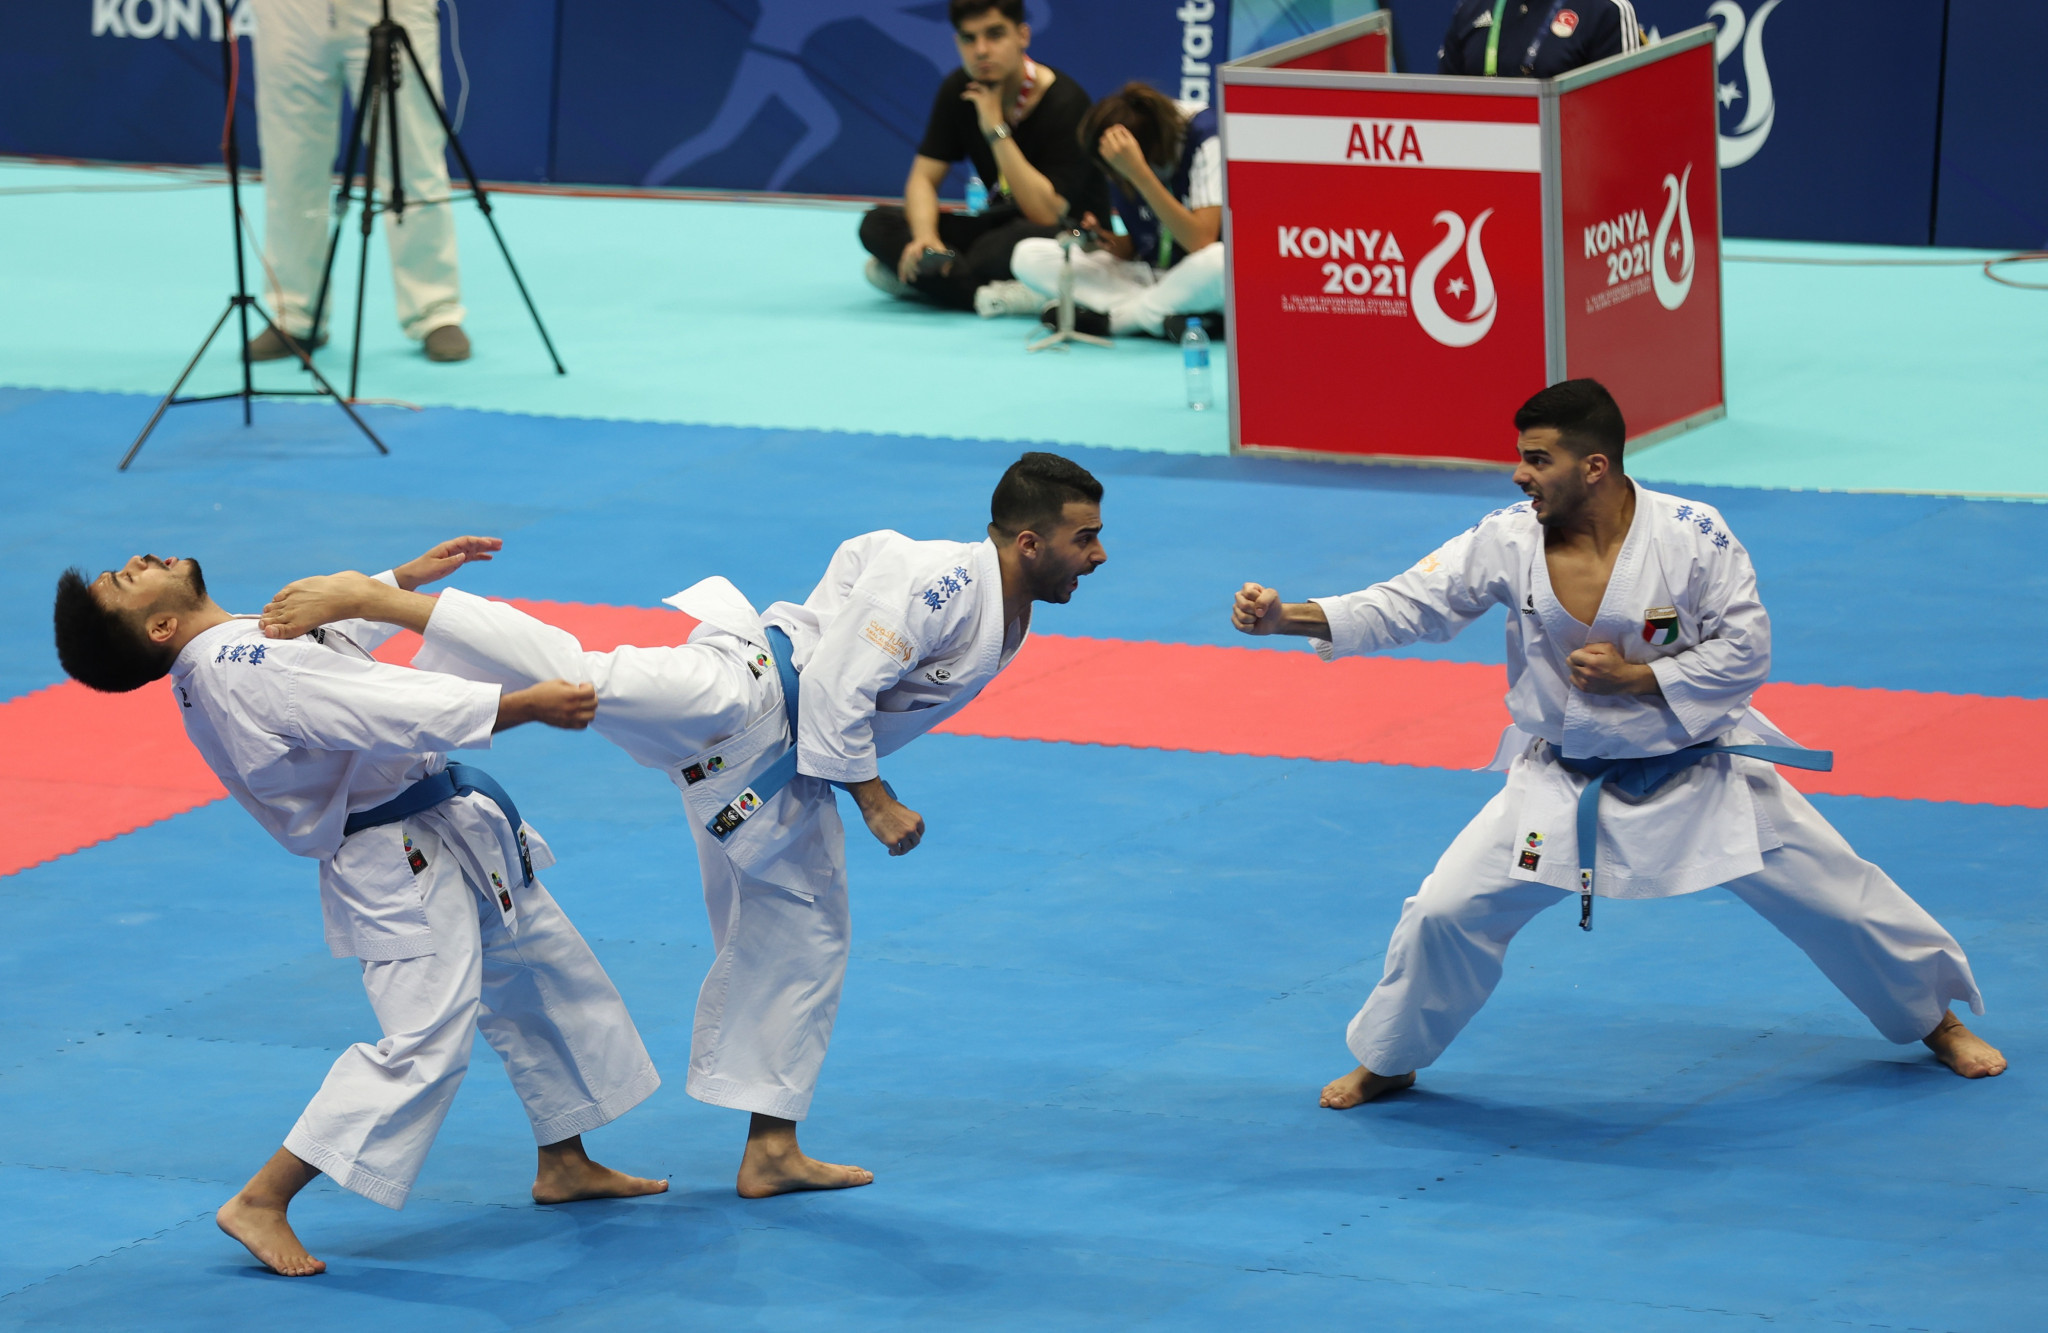 The men's kata team final was one of a number of events that finished today ©Konya 2021